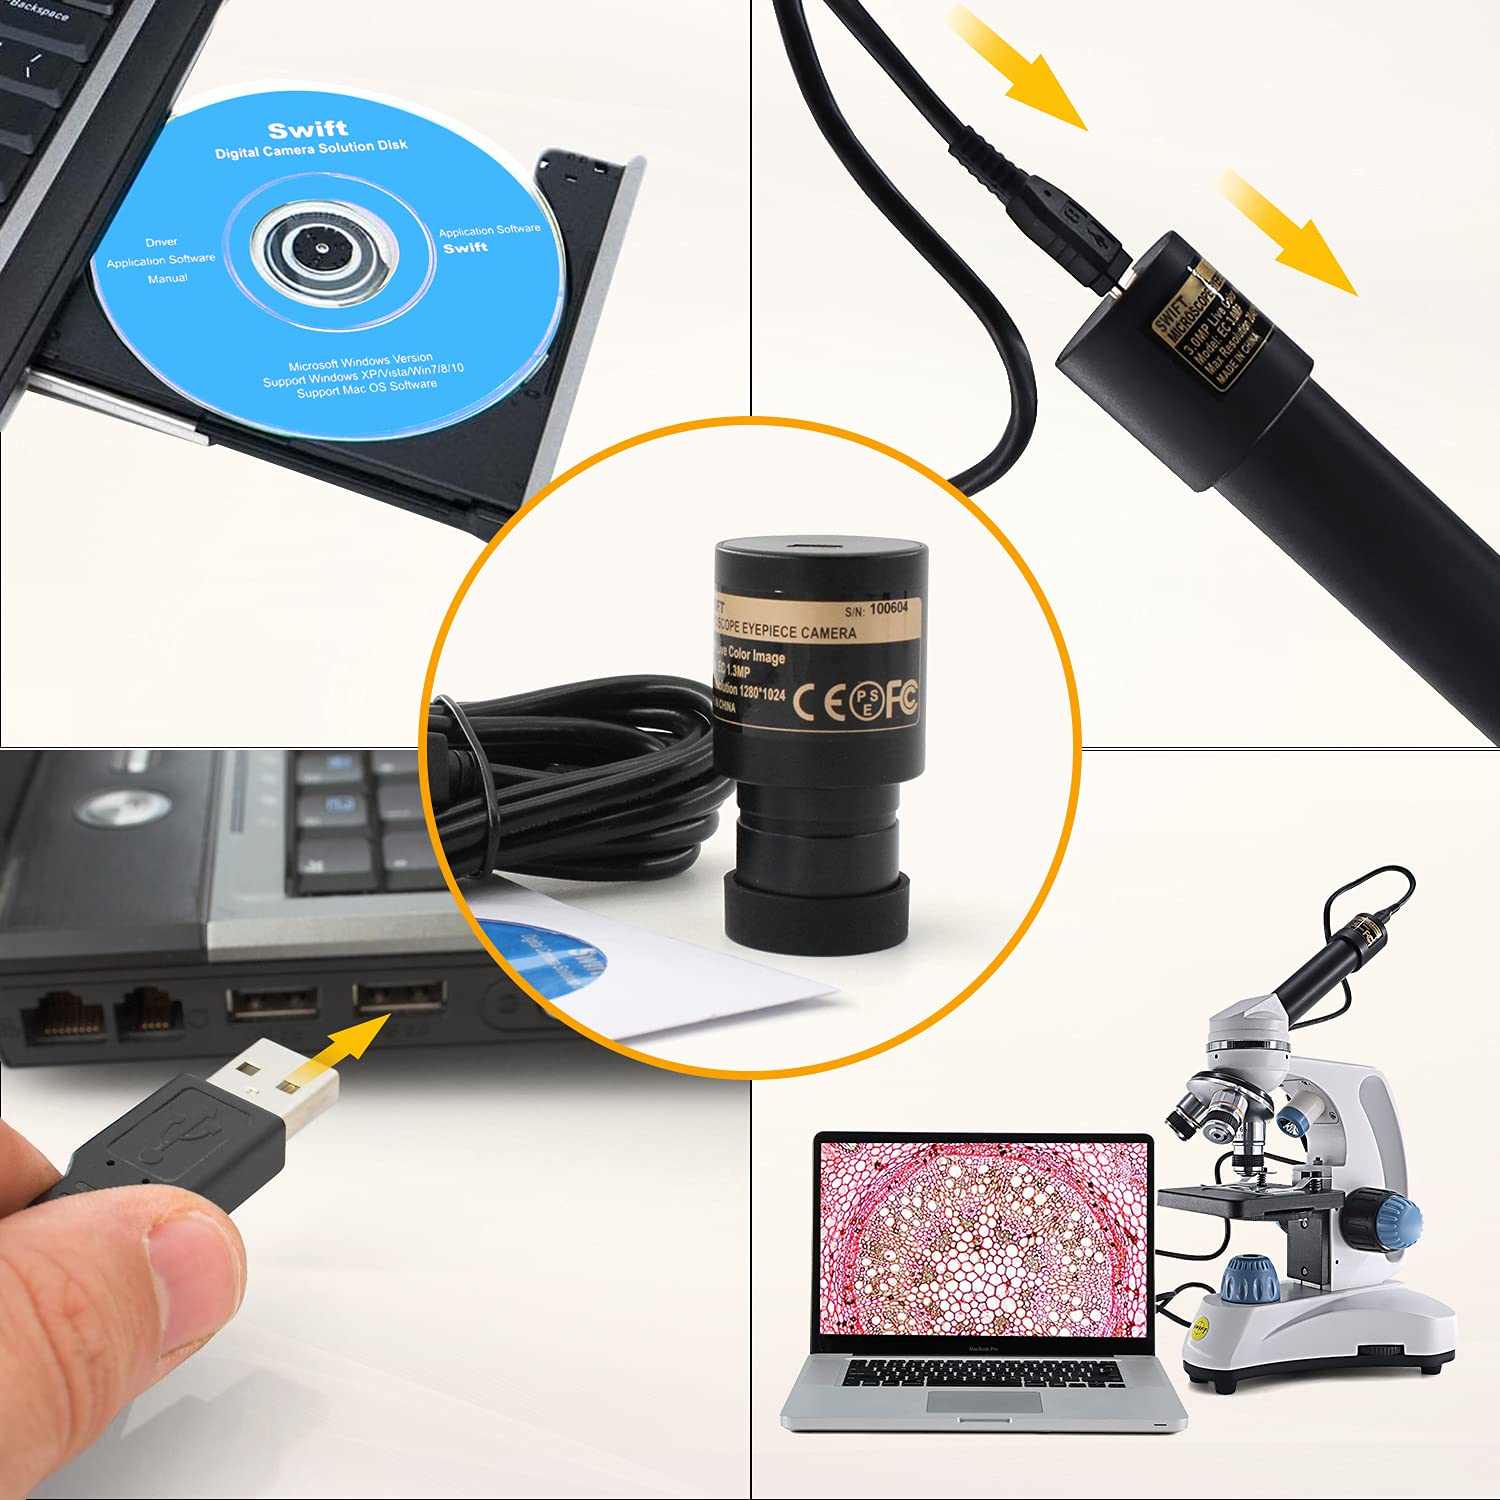 Swift 1.3 Megapixel Digital Camera for Microscopes, Eyepiece Mount, USB 2.0 Connection, Color Photography and Video, Windows and Mac Compatible